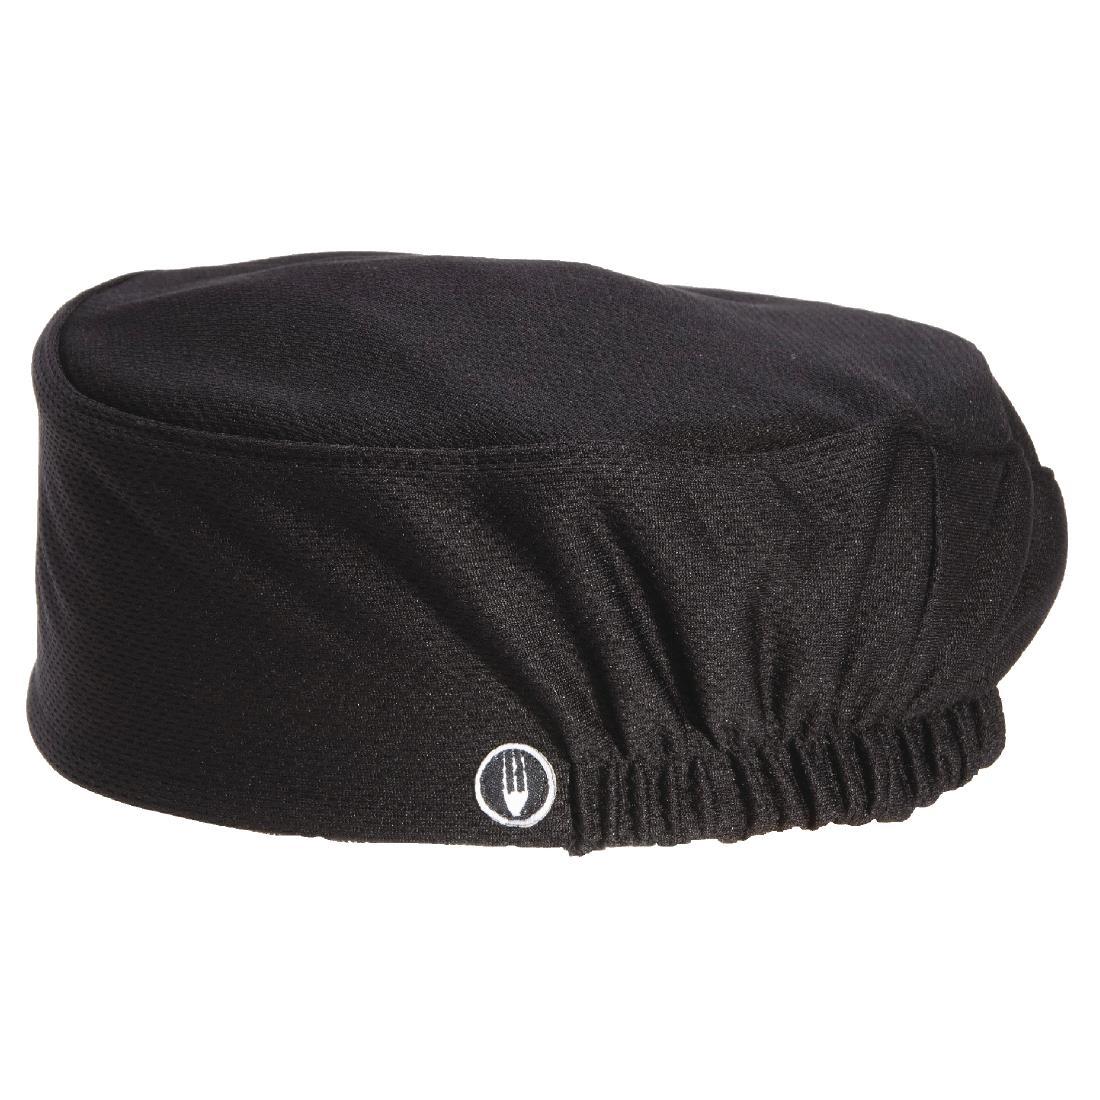 Chef Works Total Vent Beanie Black - A978  - 1